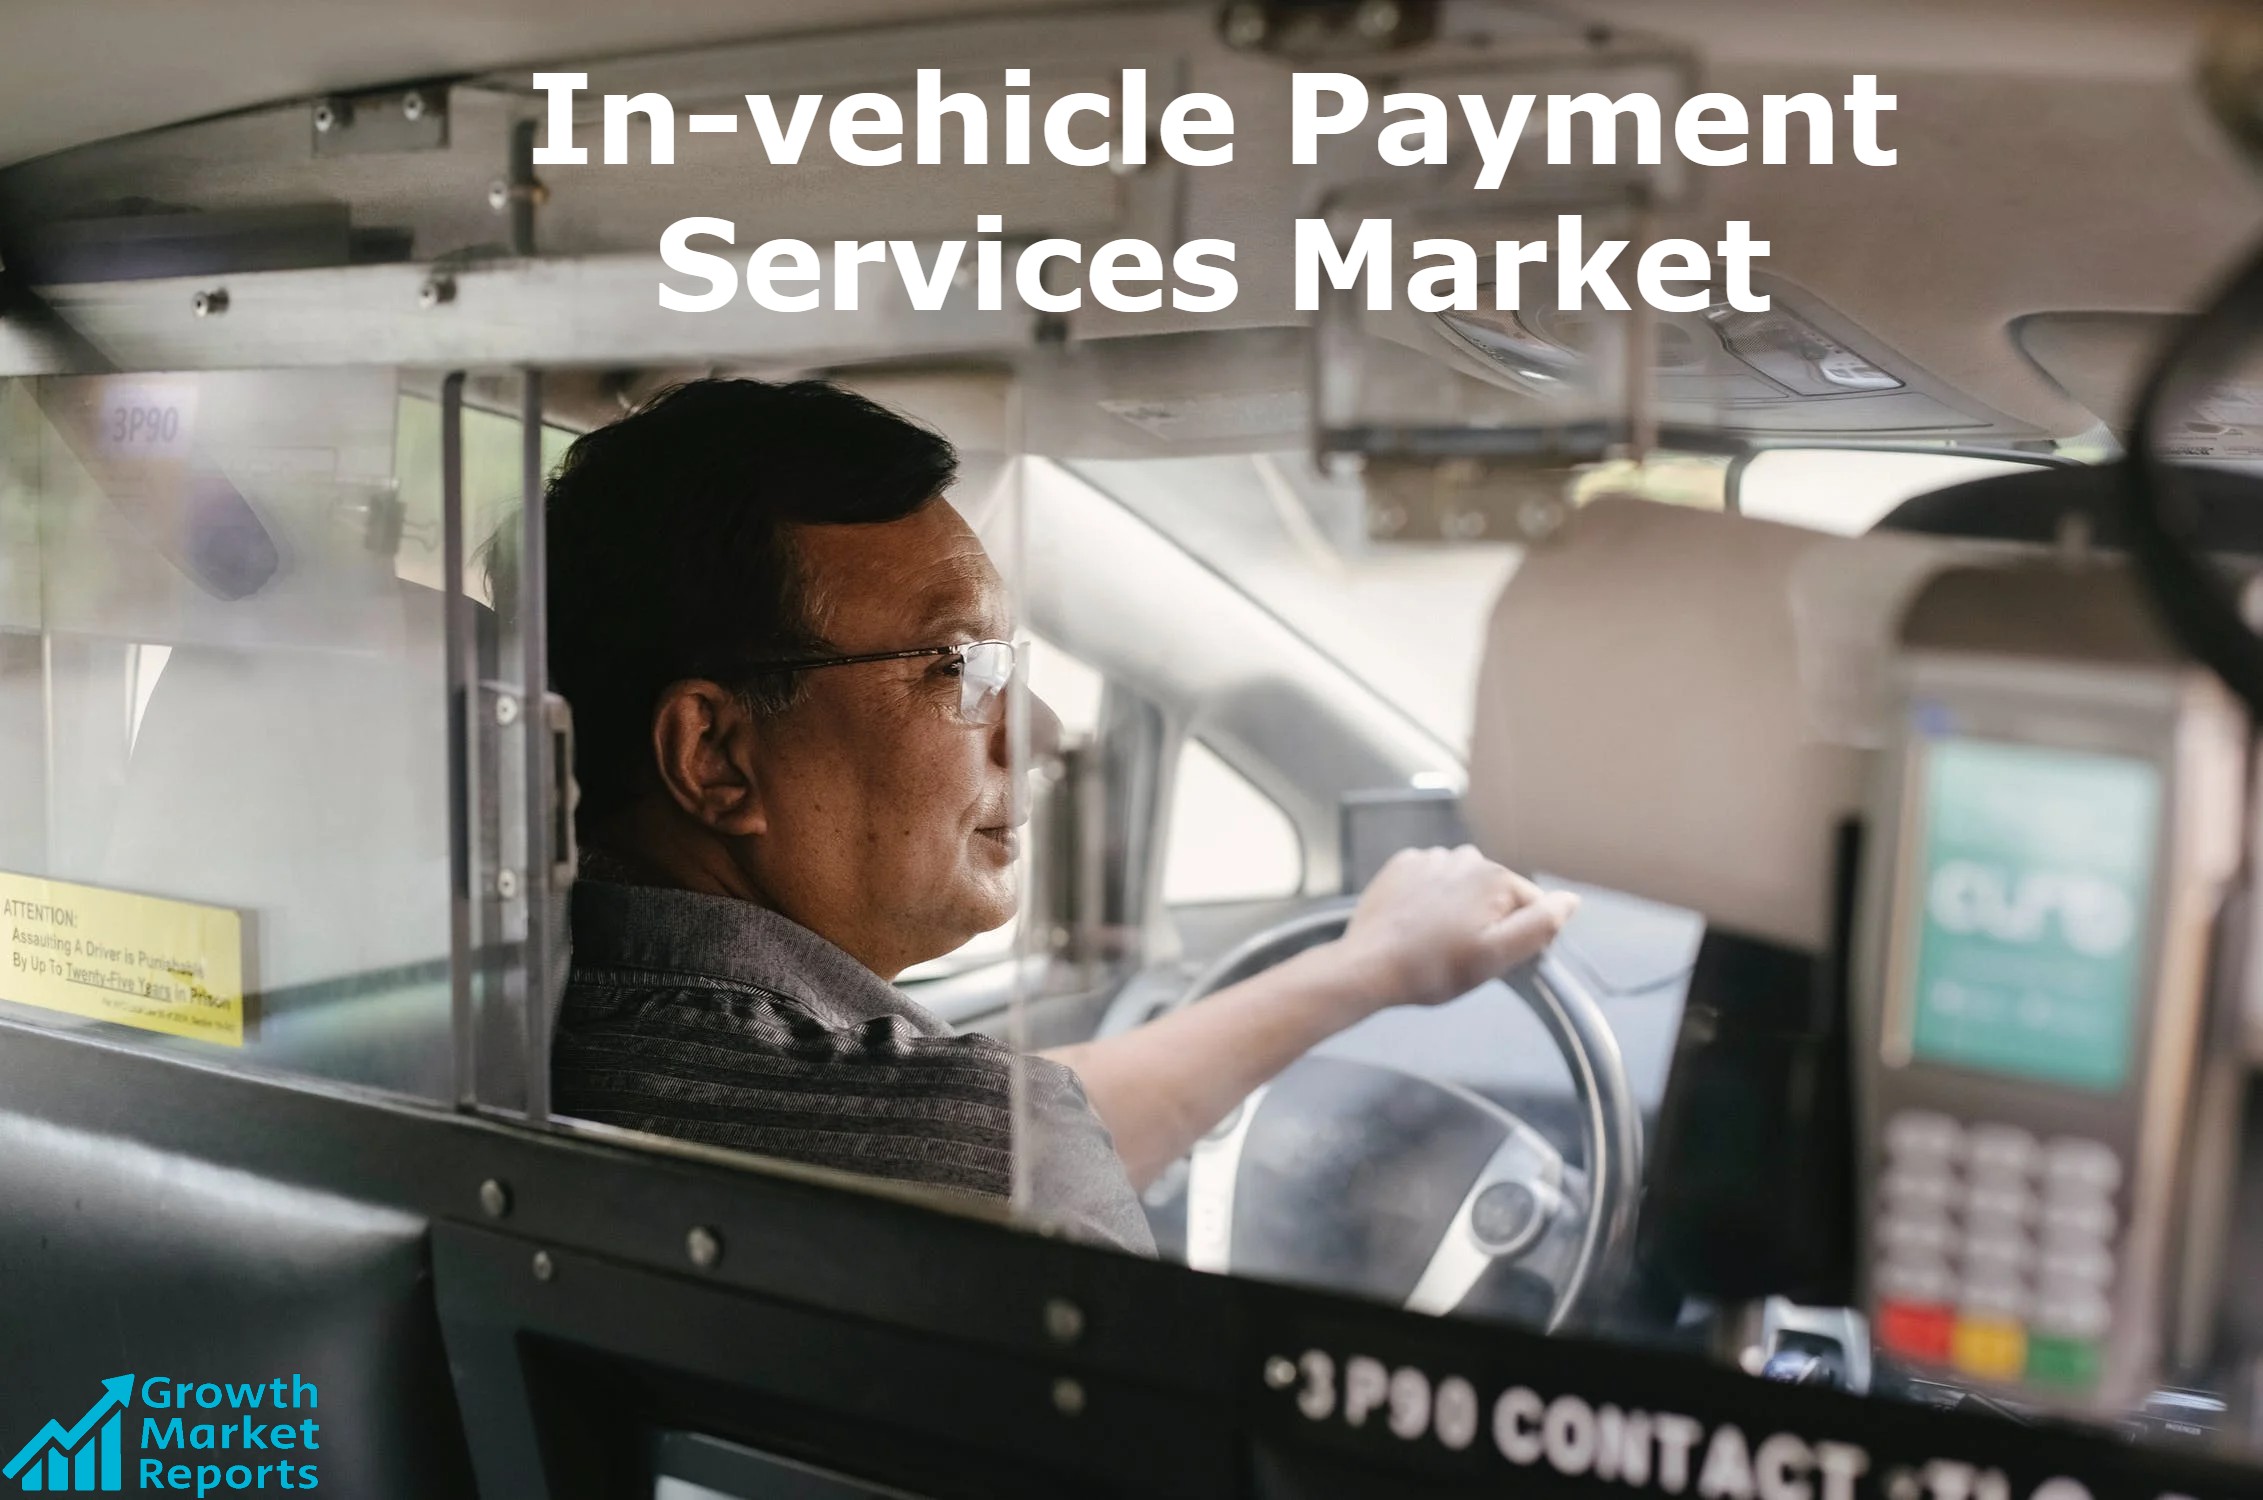 In-vehicle Payment Services Market-Growth Market Reports-ff68032e